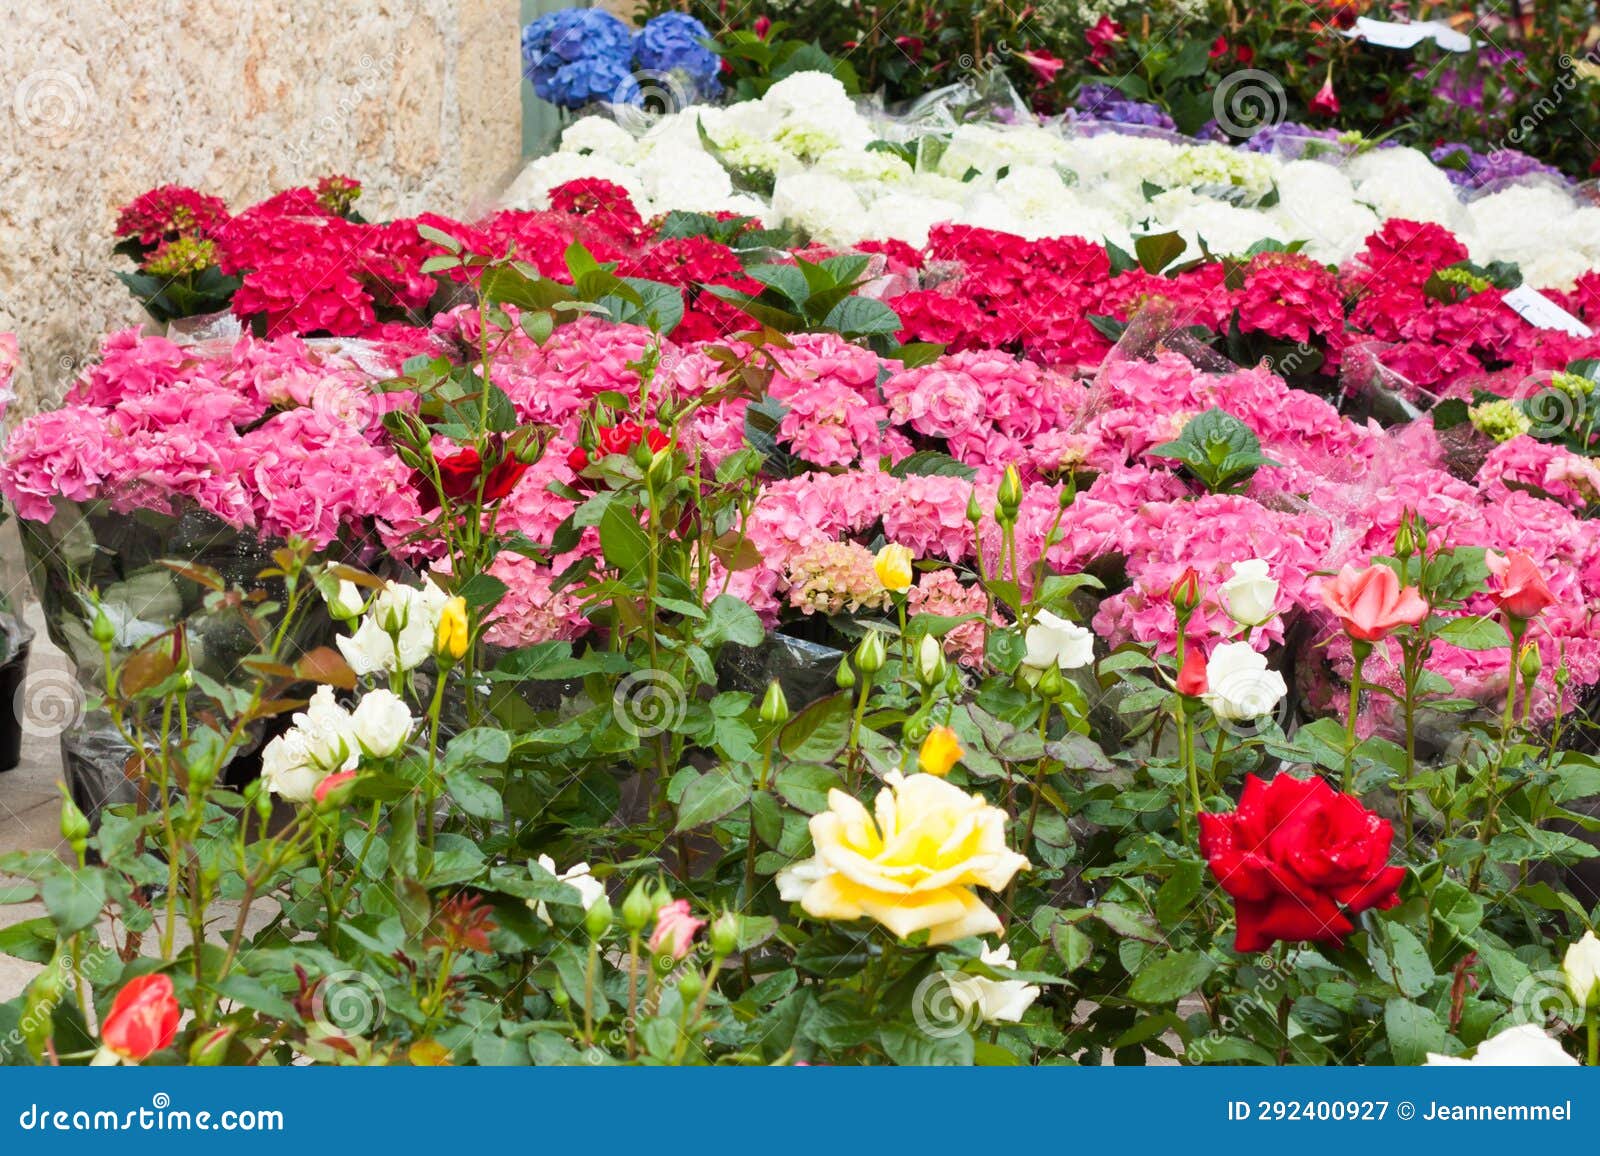 colorful flowers (roses, hydrangeas...) for sale on 